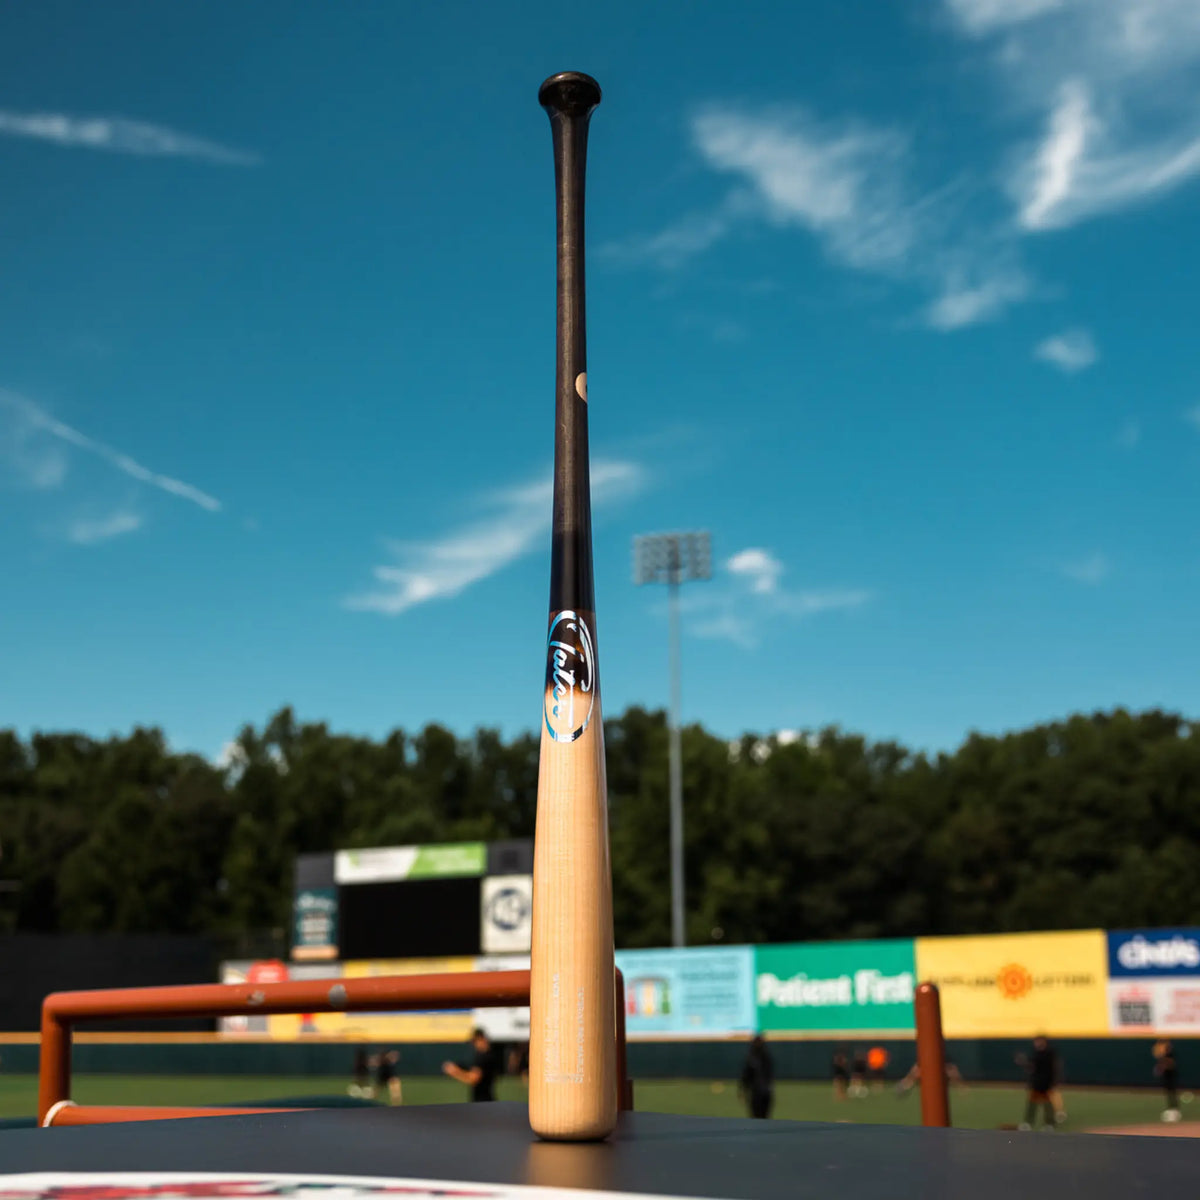 This image features a Tater X4 Pro Maple bat standing upright on the edge of a baseball field. The bat&#39;s handle points skyward while the backdrop captures the stadium seating and clear blue sky, indicating its popularity in tournaments and showcases as a Victus wood bat alternative.